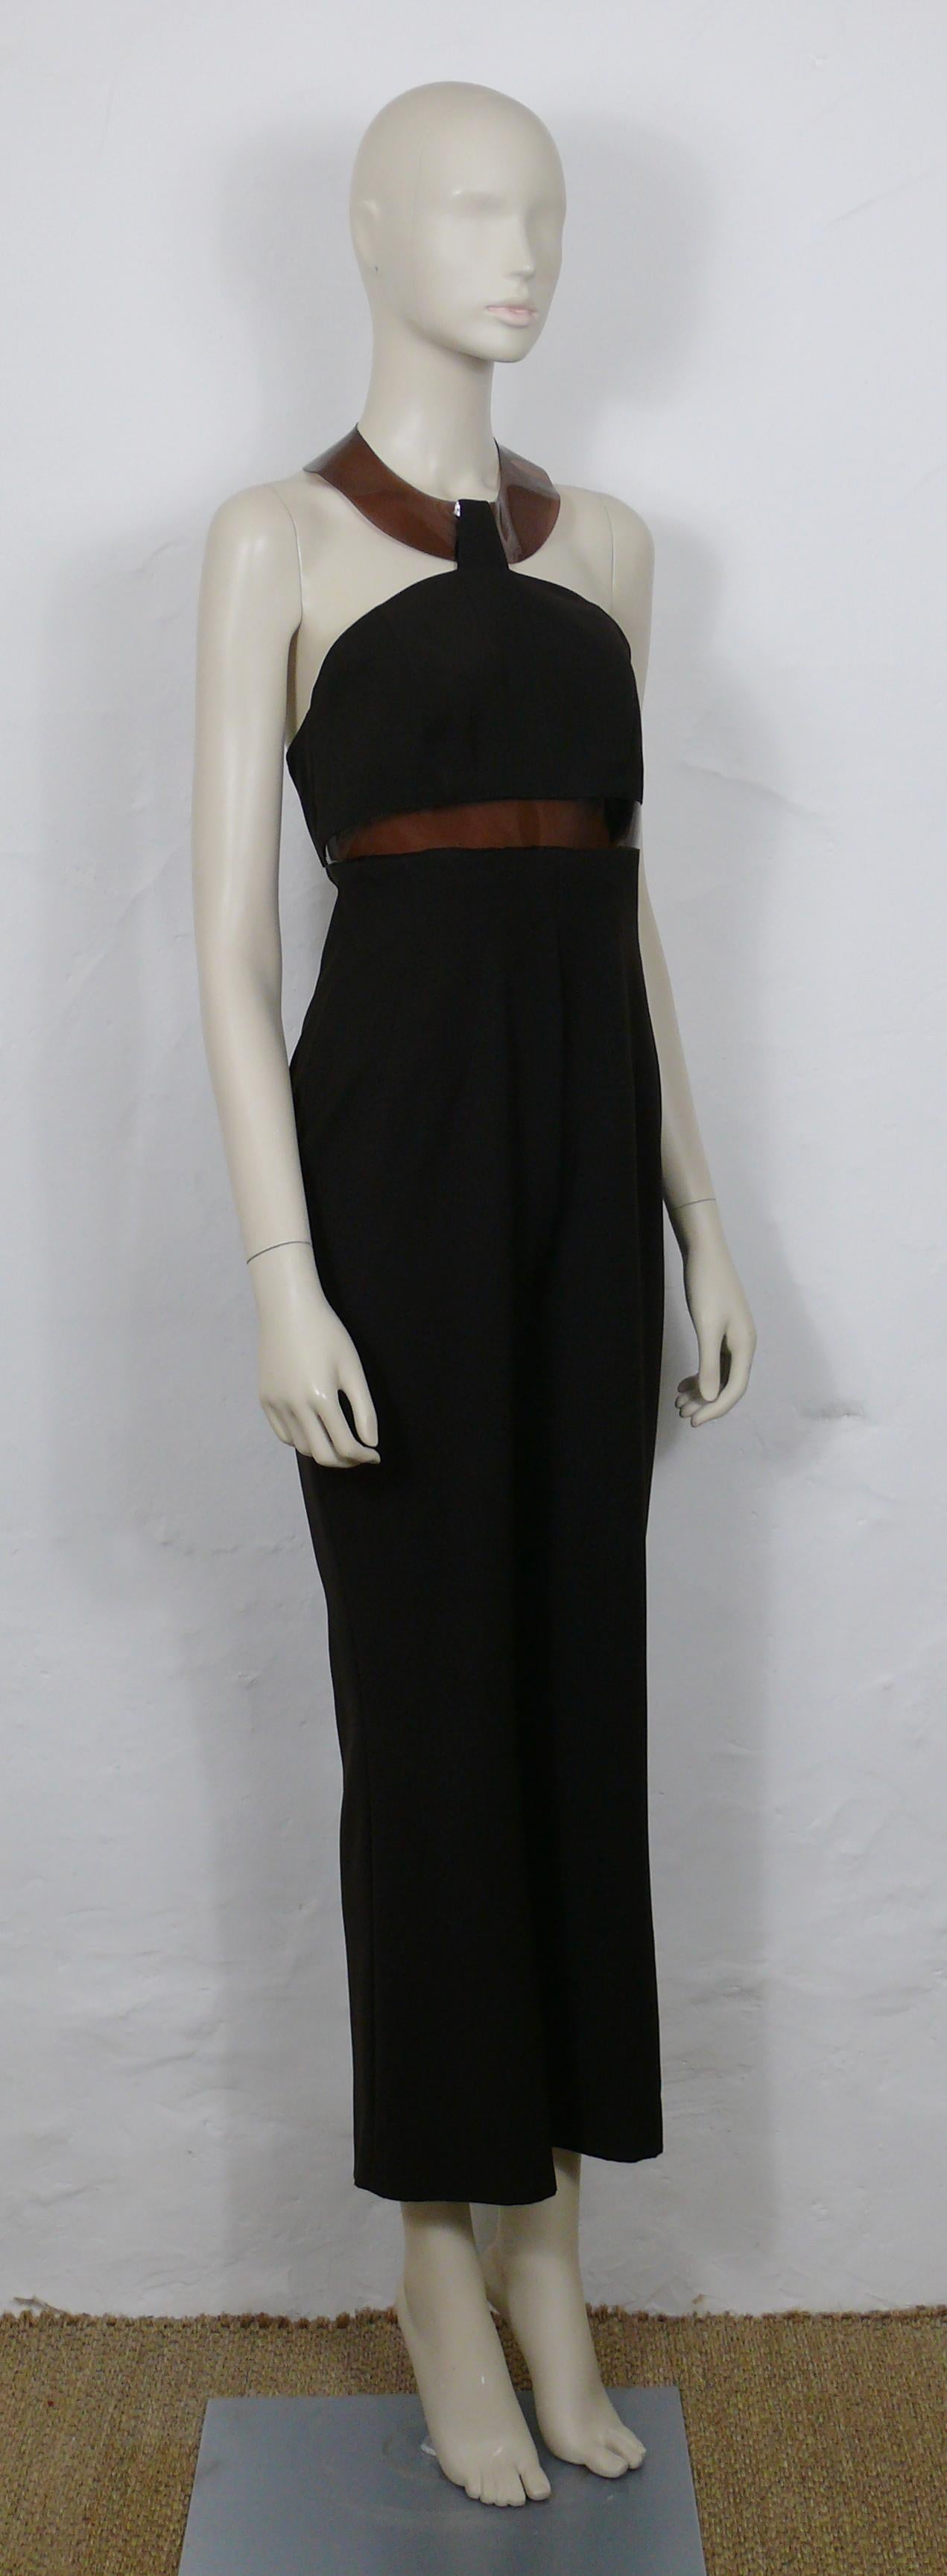 MUGLER vintage brown halterneckl backless overall with PVC details.

Probably from the early 2000s.

This overall features :
- Brown PVC collar with snap button closure.
- Structured bustier with boning.
- PVC yoke detail under the bust.
- Back